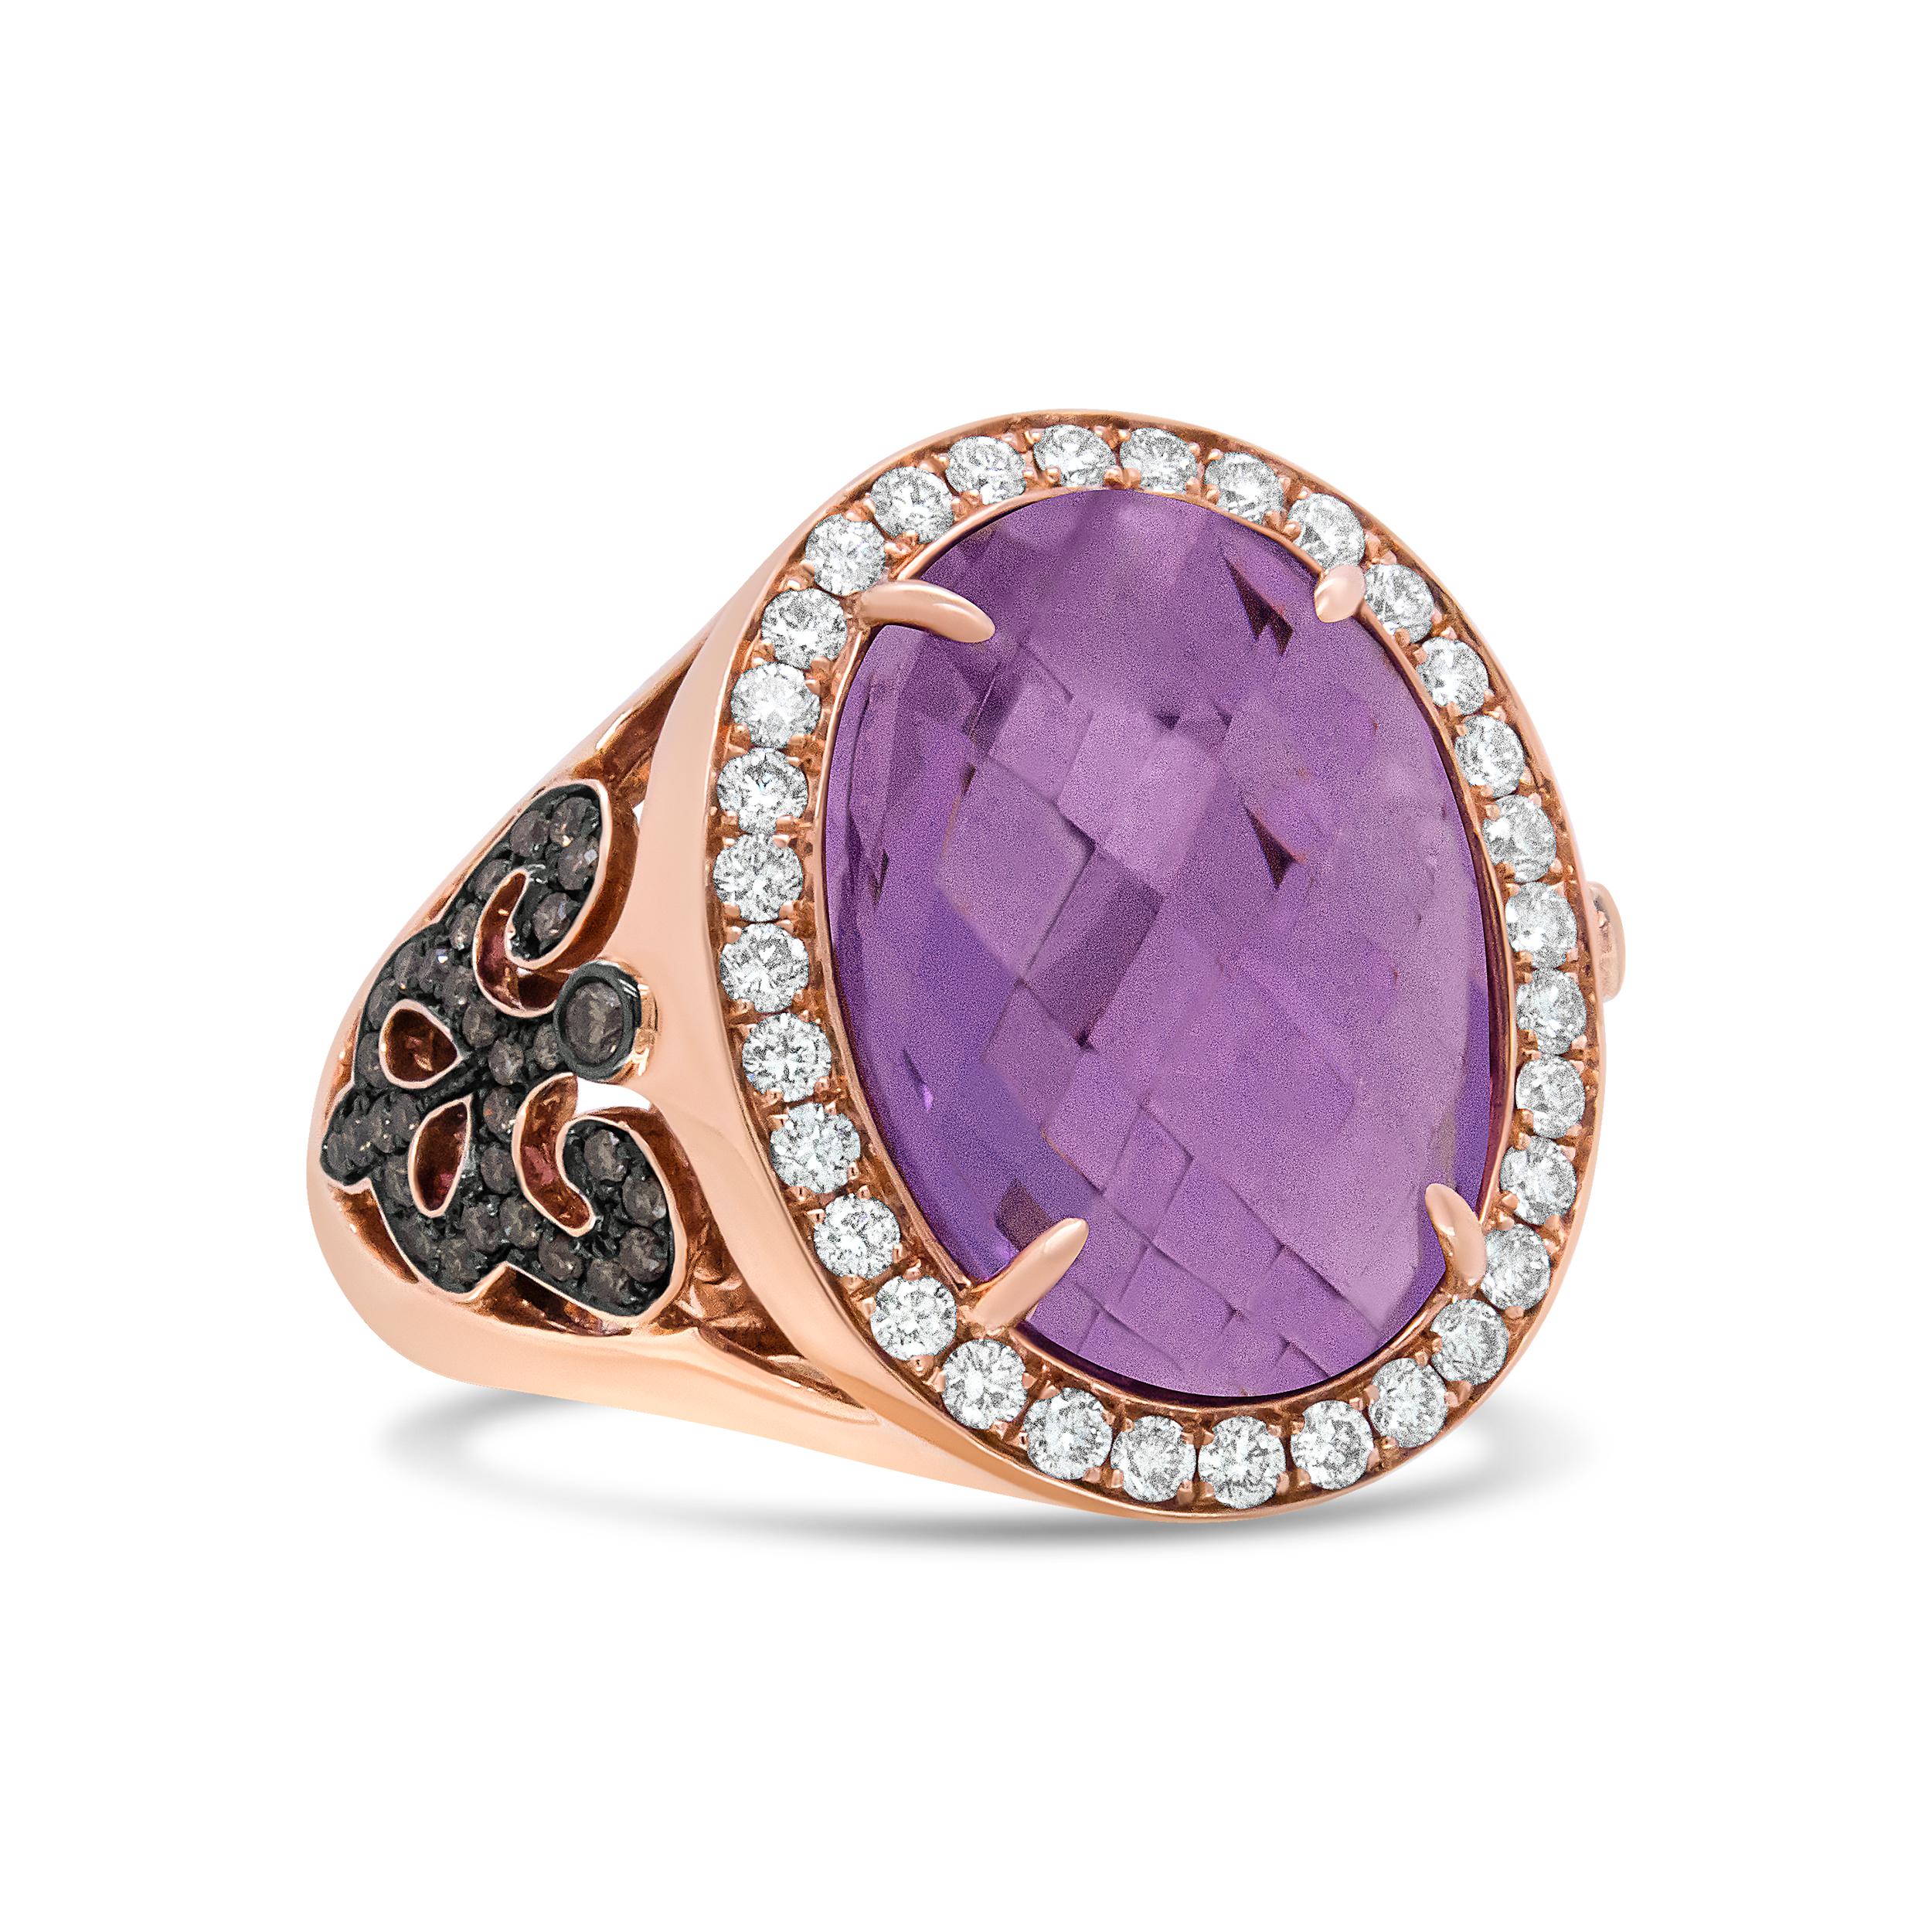 A beautiful oval shaped purple amethyst captivates the soul of this once-in-a-lifetime ring. Sitting as the central motif, the gemstone is 18x13mm in size and rests delicately on luxurious 18k rose gold. The gemstone is flanked by a circular design